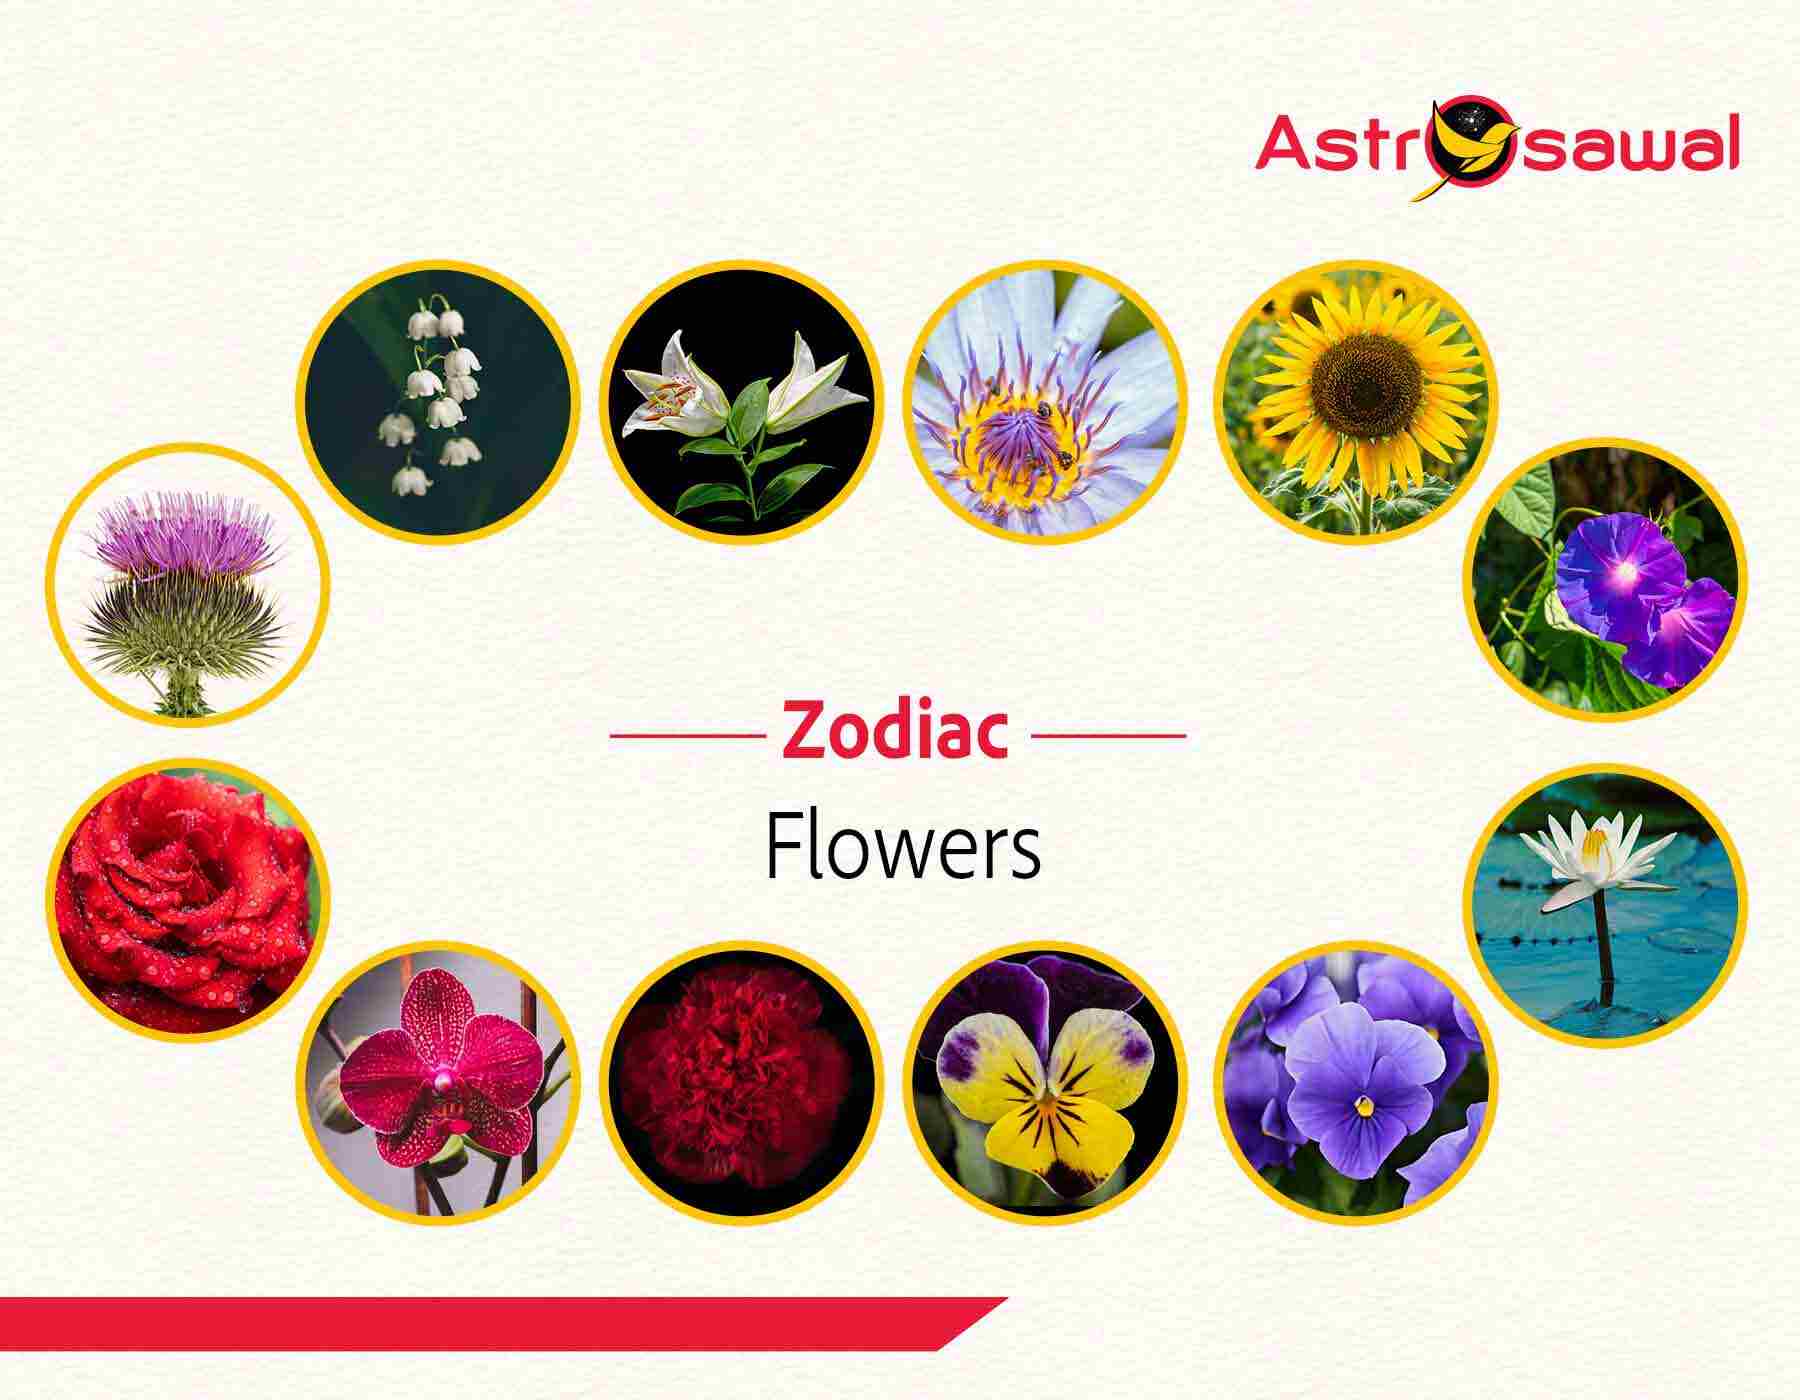 Lucky Flowers For You Based On Your Zodiac Sign